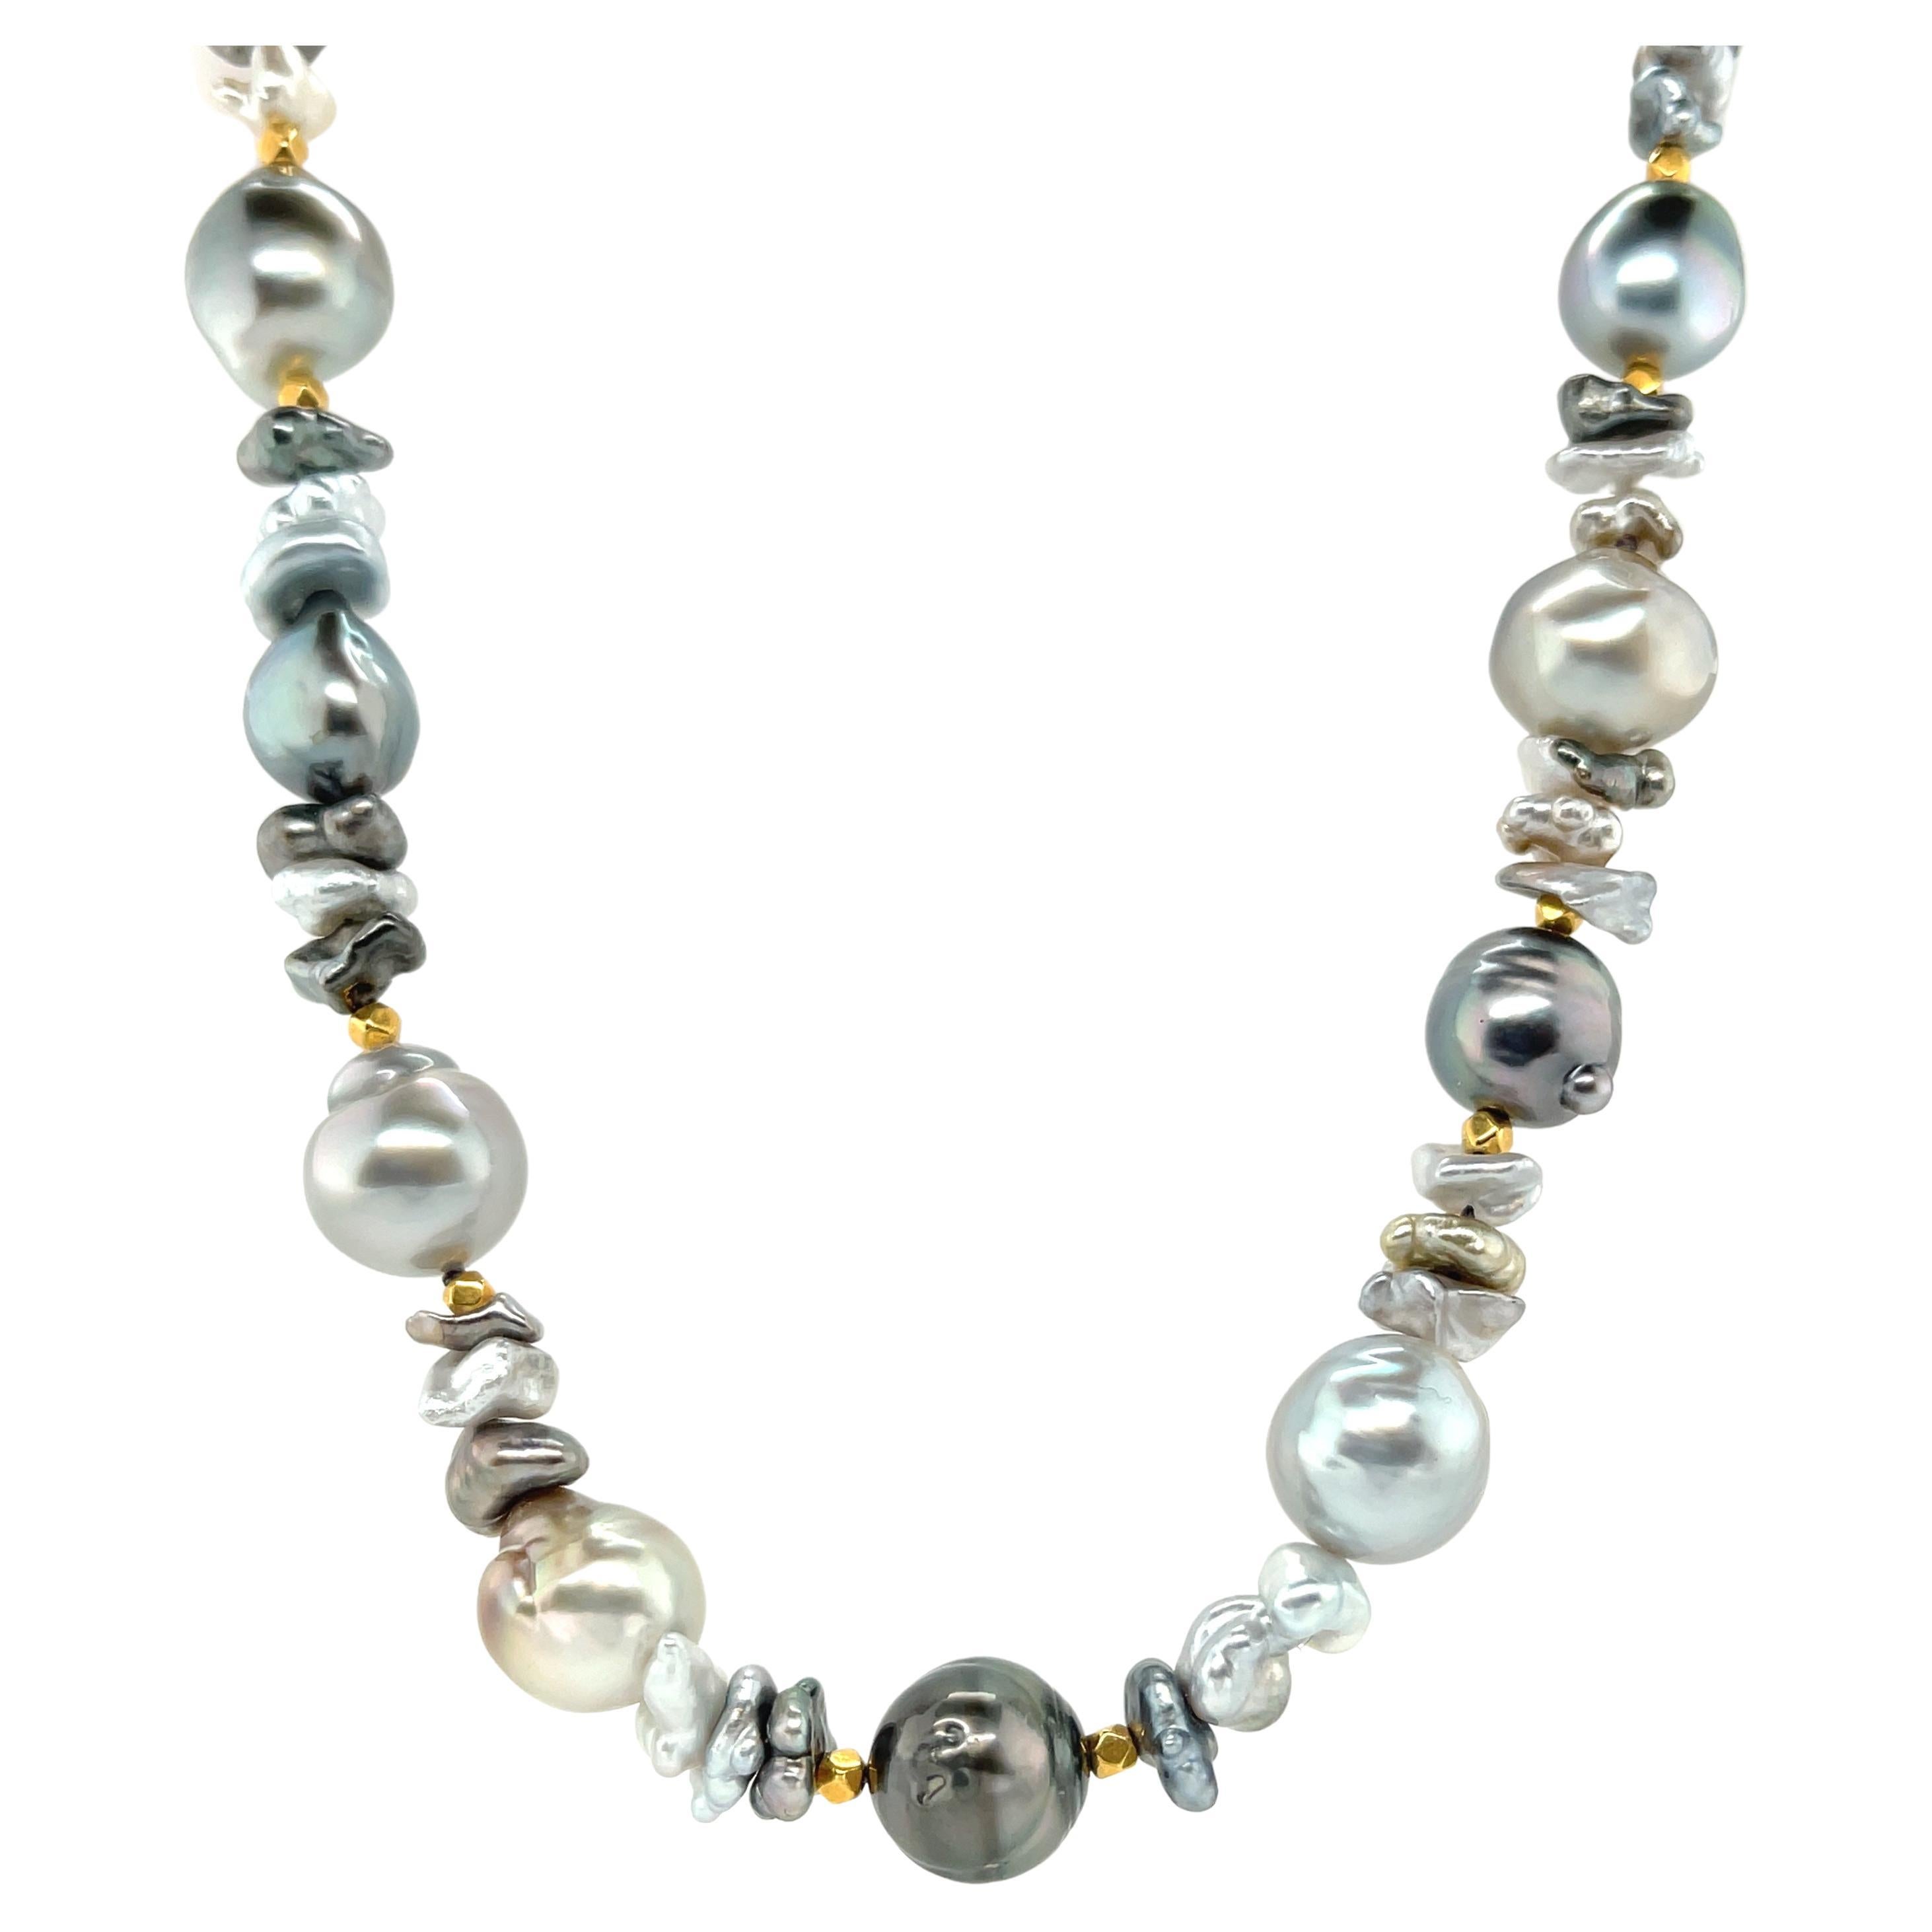 White Baroque Freshwater Cultured Pearl Necklace, 17 Inches, Sterling  Silver